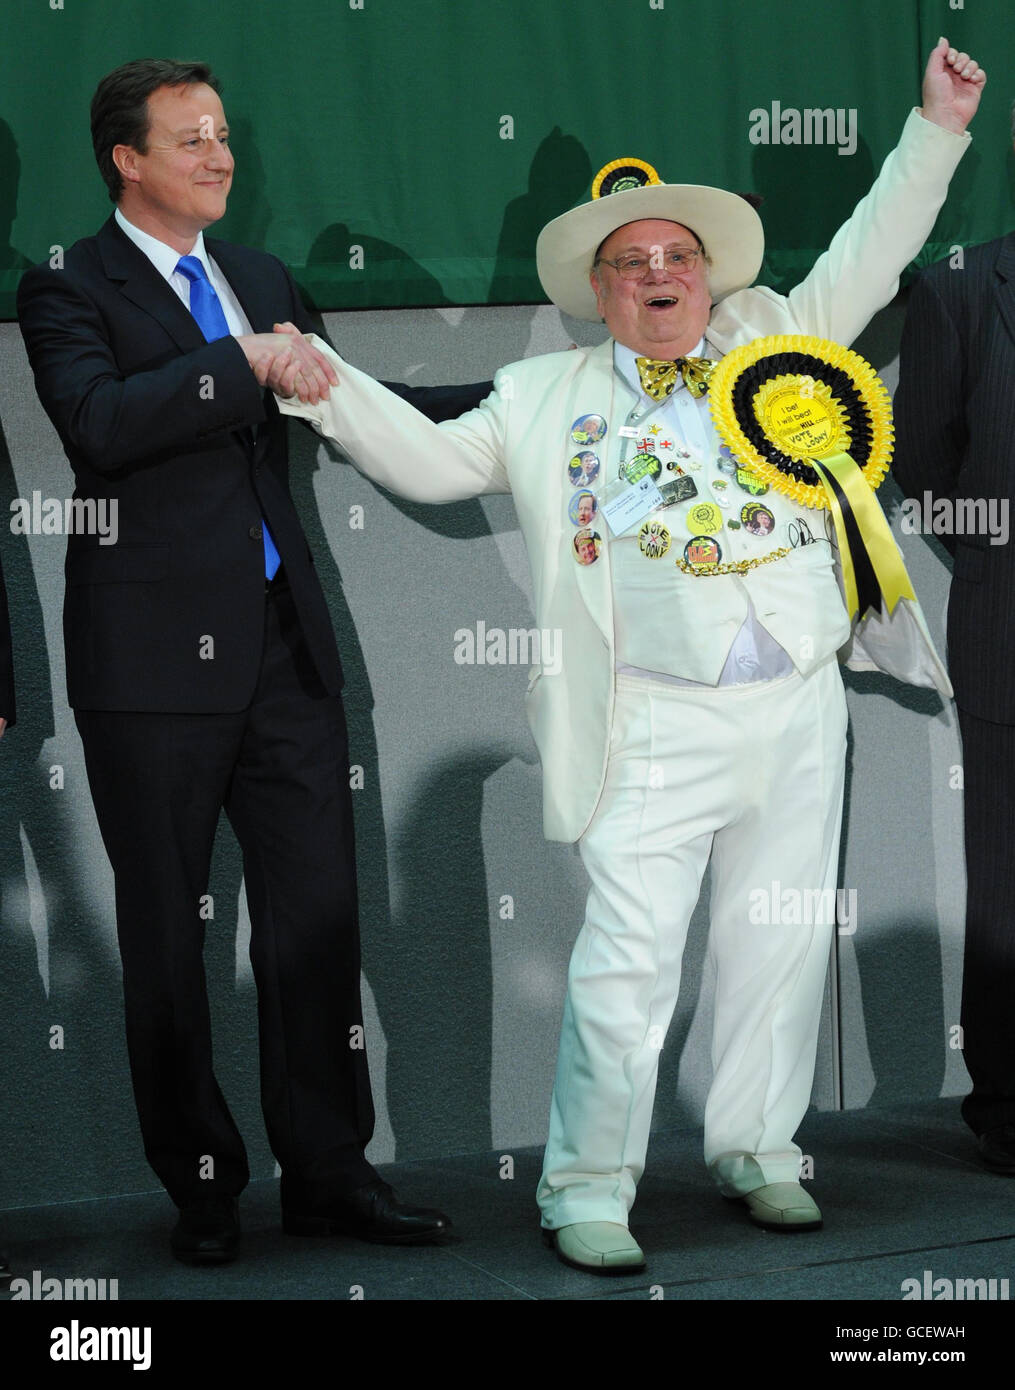 Conservative Party leader David Cameron celebrates winning his seat of Witney tonight with Monster Raving Loony William Hill Party candidate Alan Hope. Stock Photo